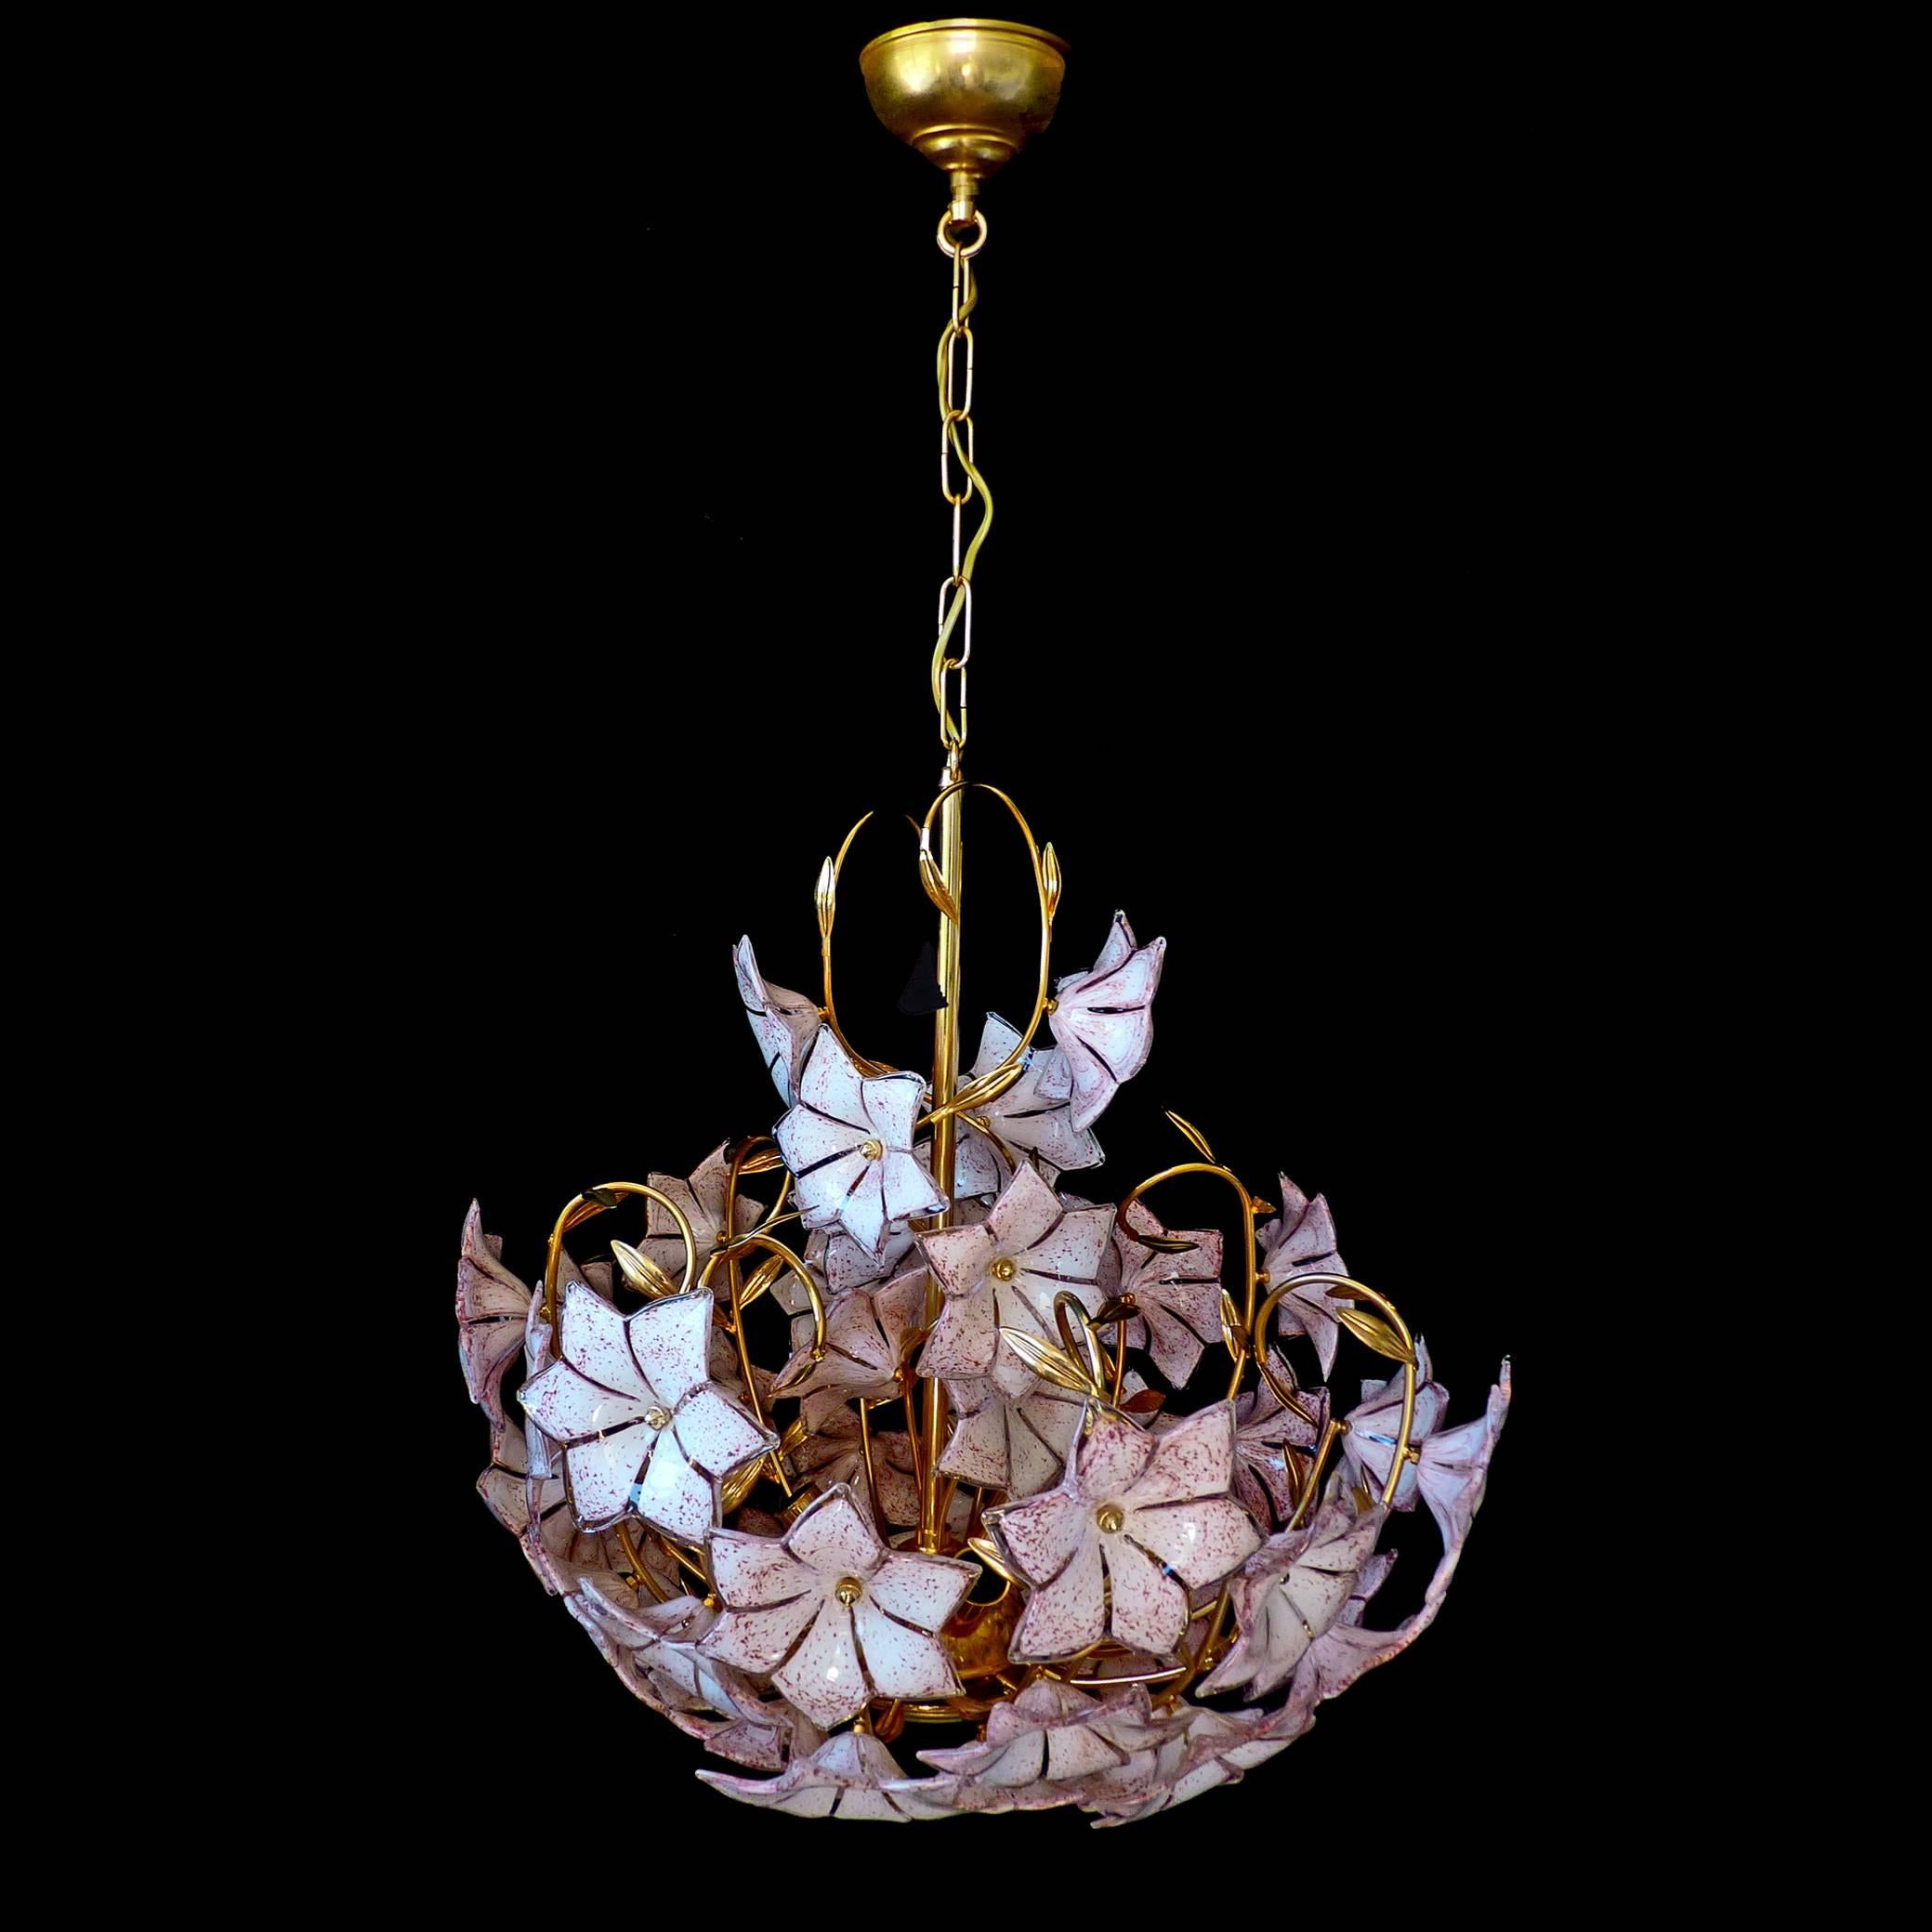 Large Venini Style Italian Murano Pink Flower Bouquet Glass GiltBrass Chandelier In Good Condition For Sale In Coimbra, PT